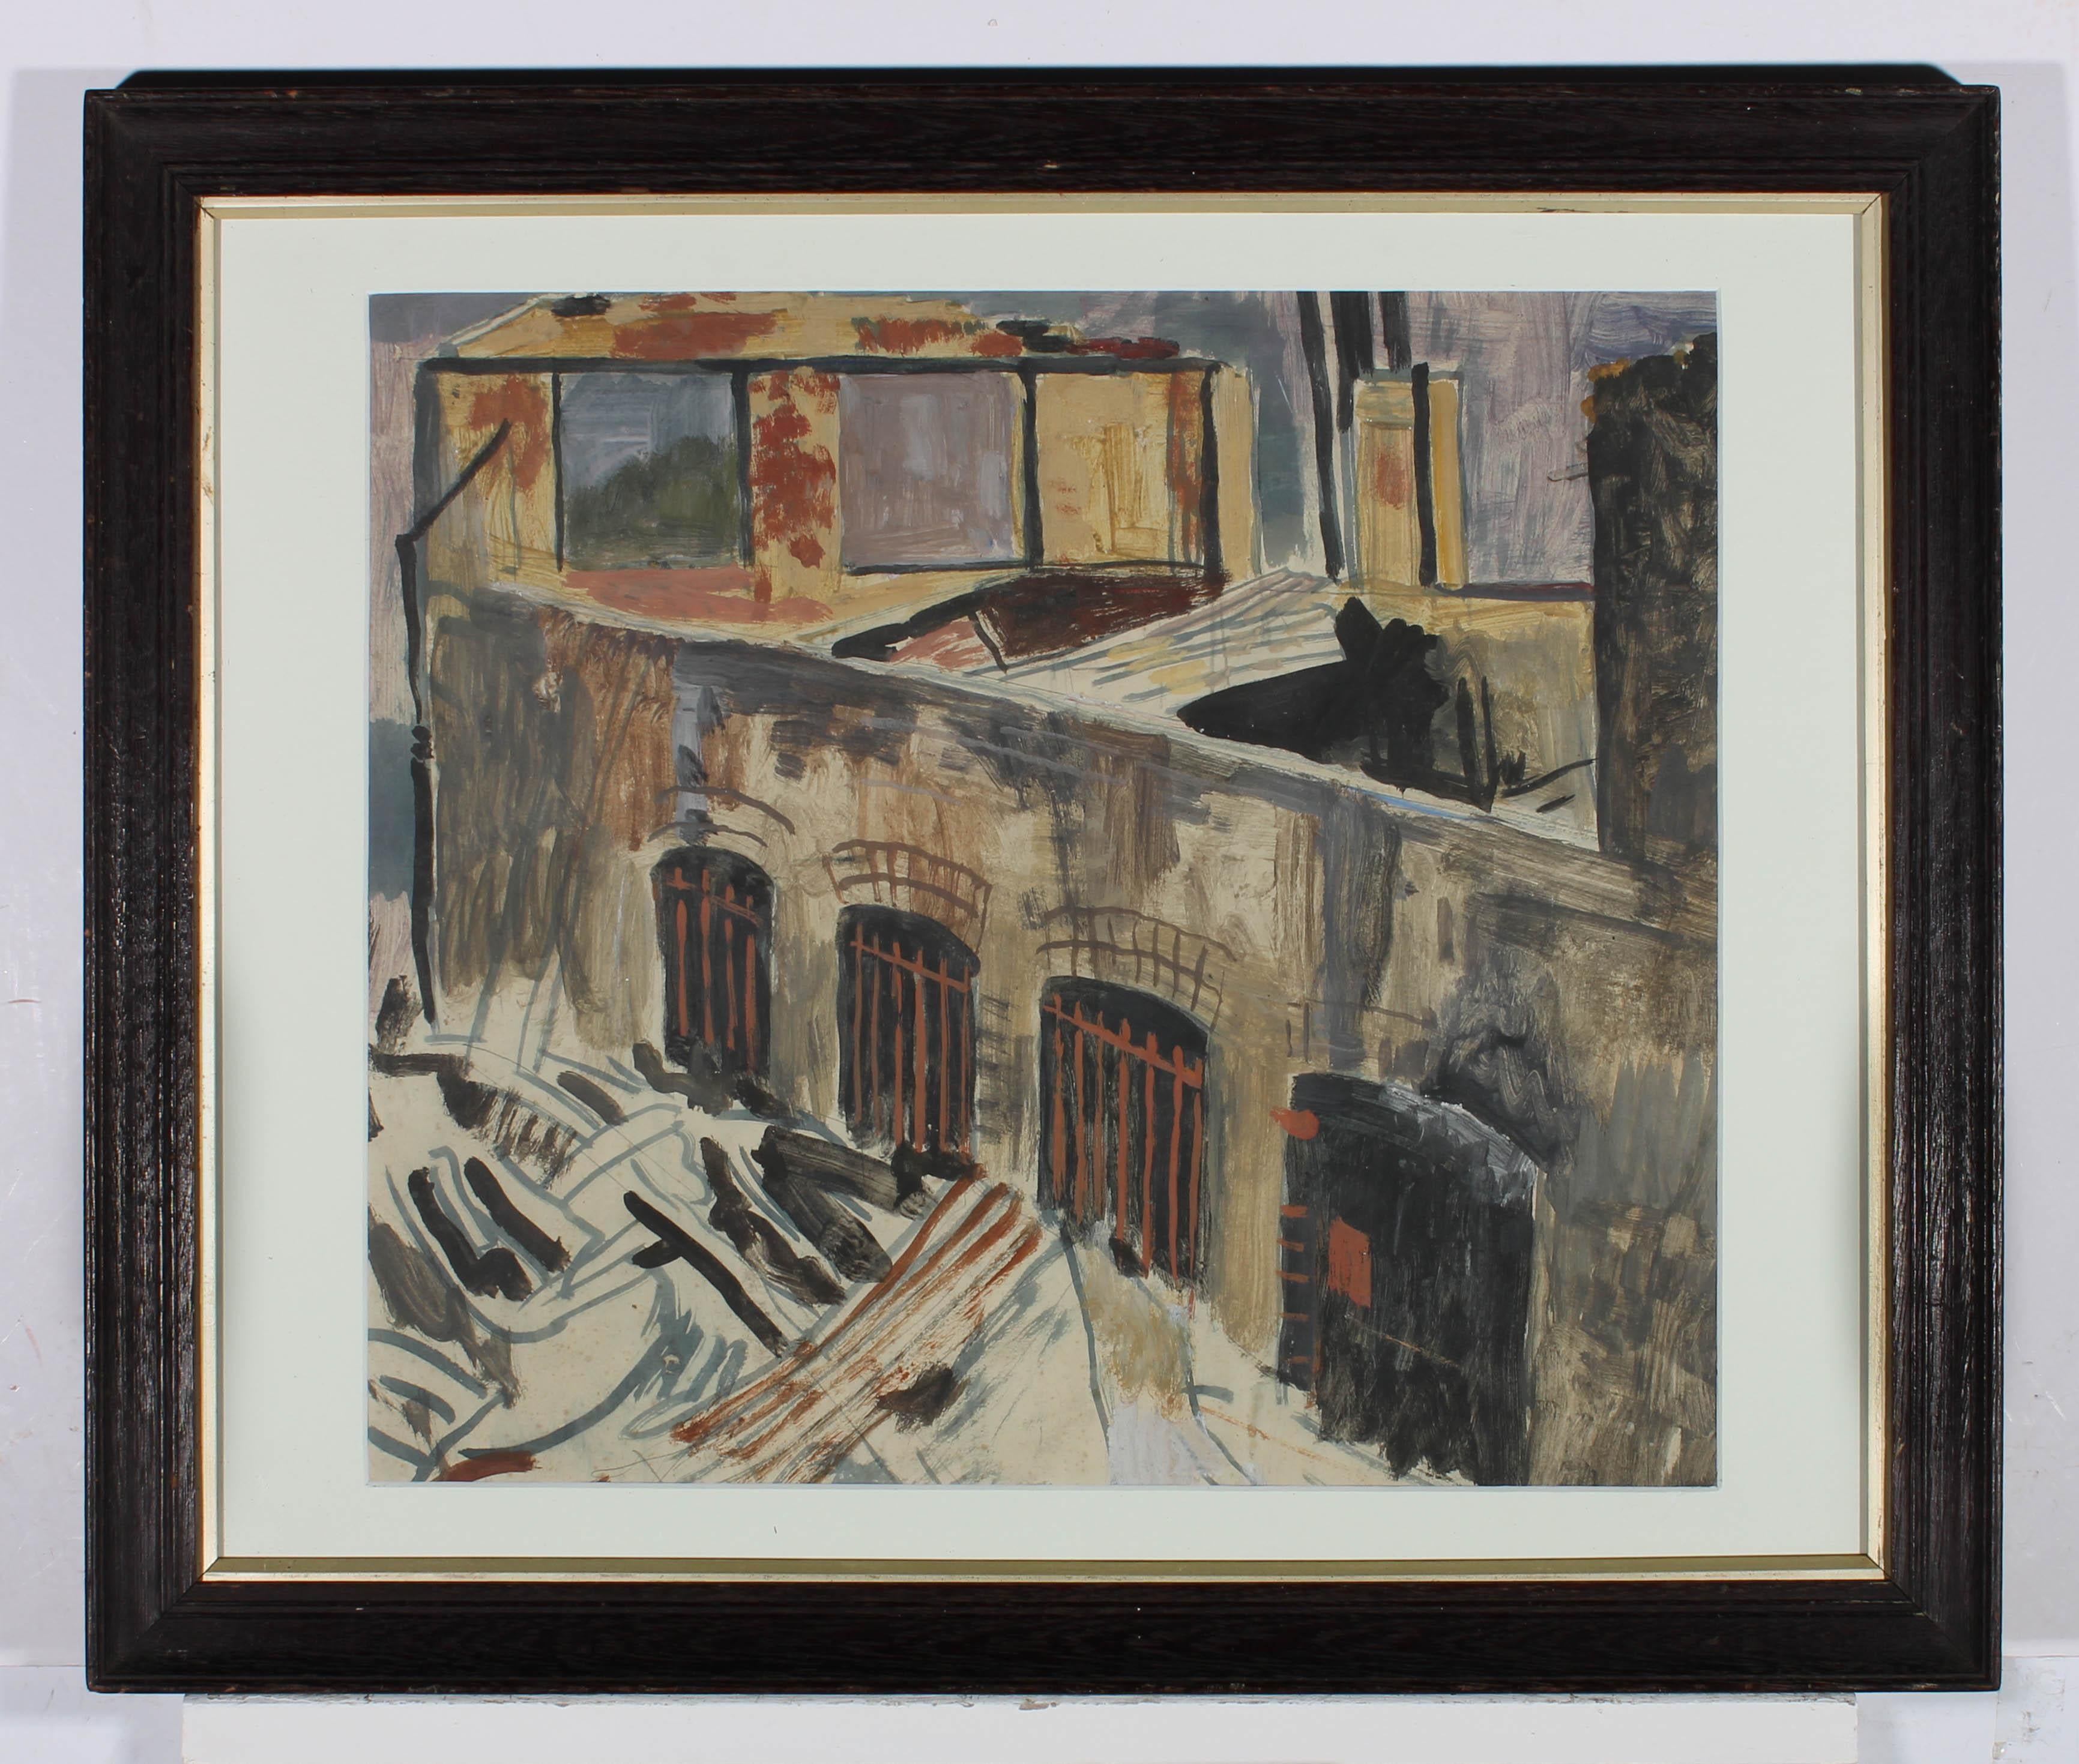 An impressionistic architectural composition depicting three Iron barred waterway tunnels, running under an old warehouse building. Unsigned. The painting is well presented in a fine dark wood frame, with a slim gilt slip and white card mount.